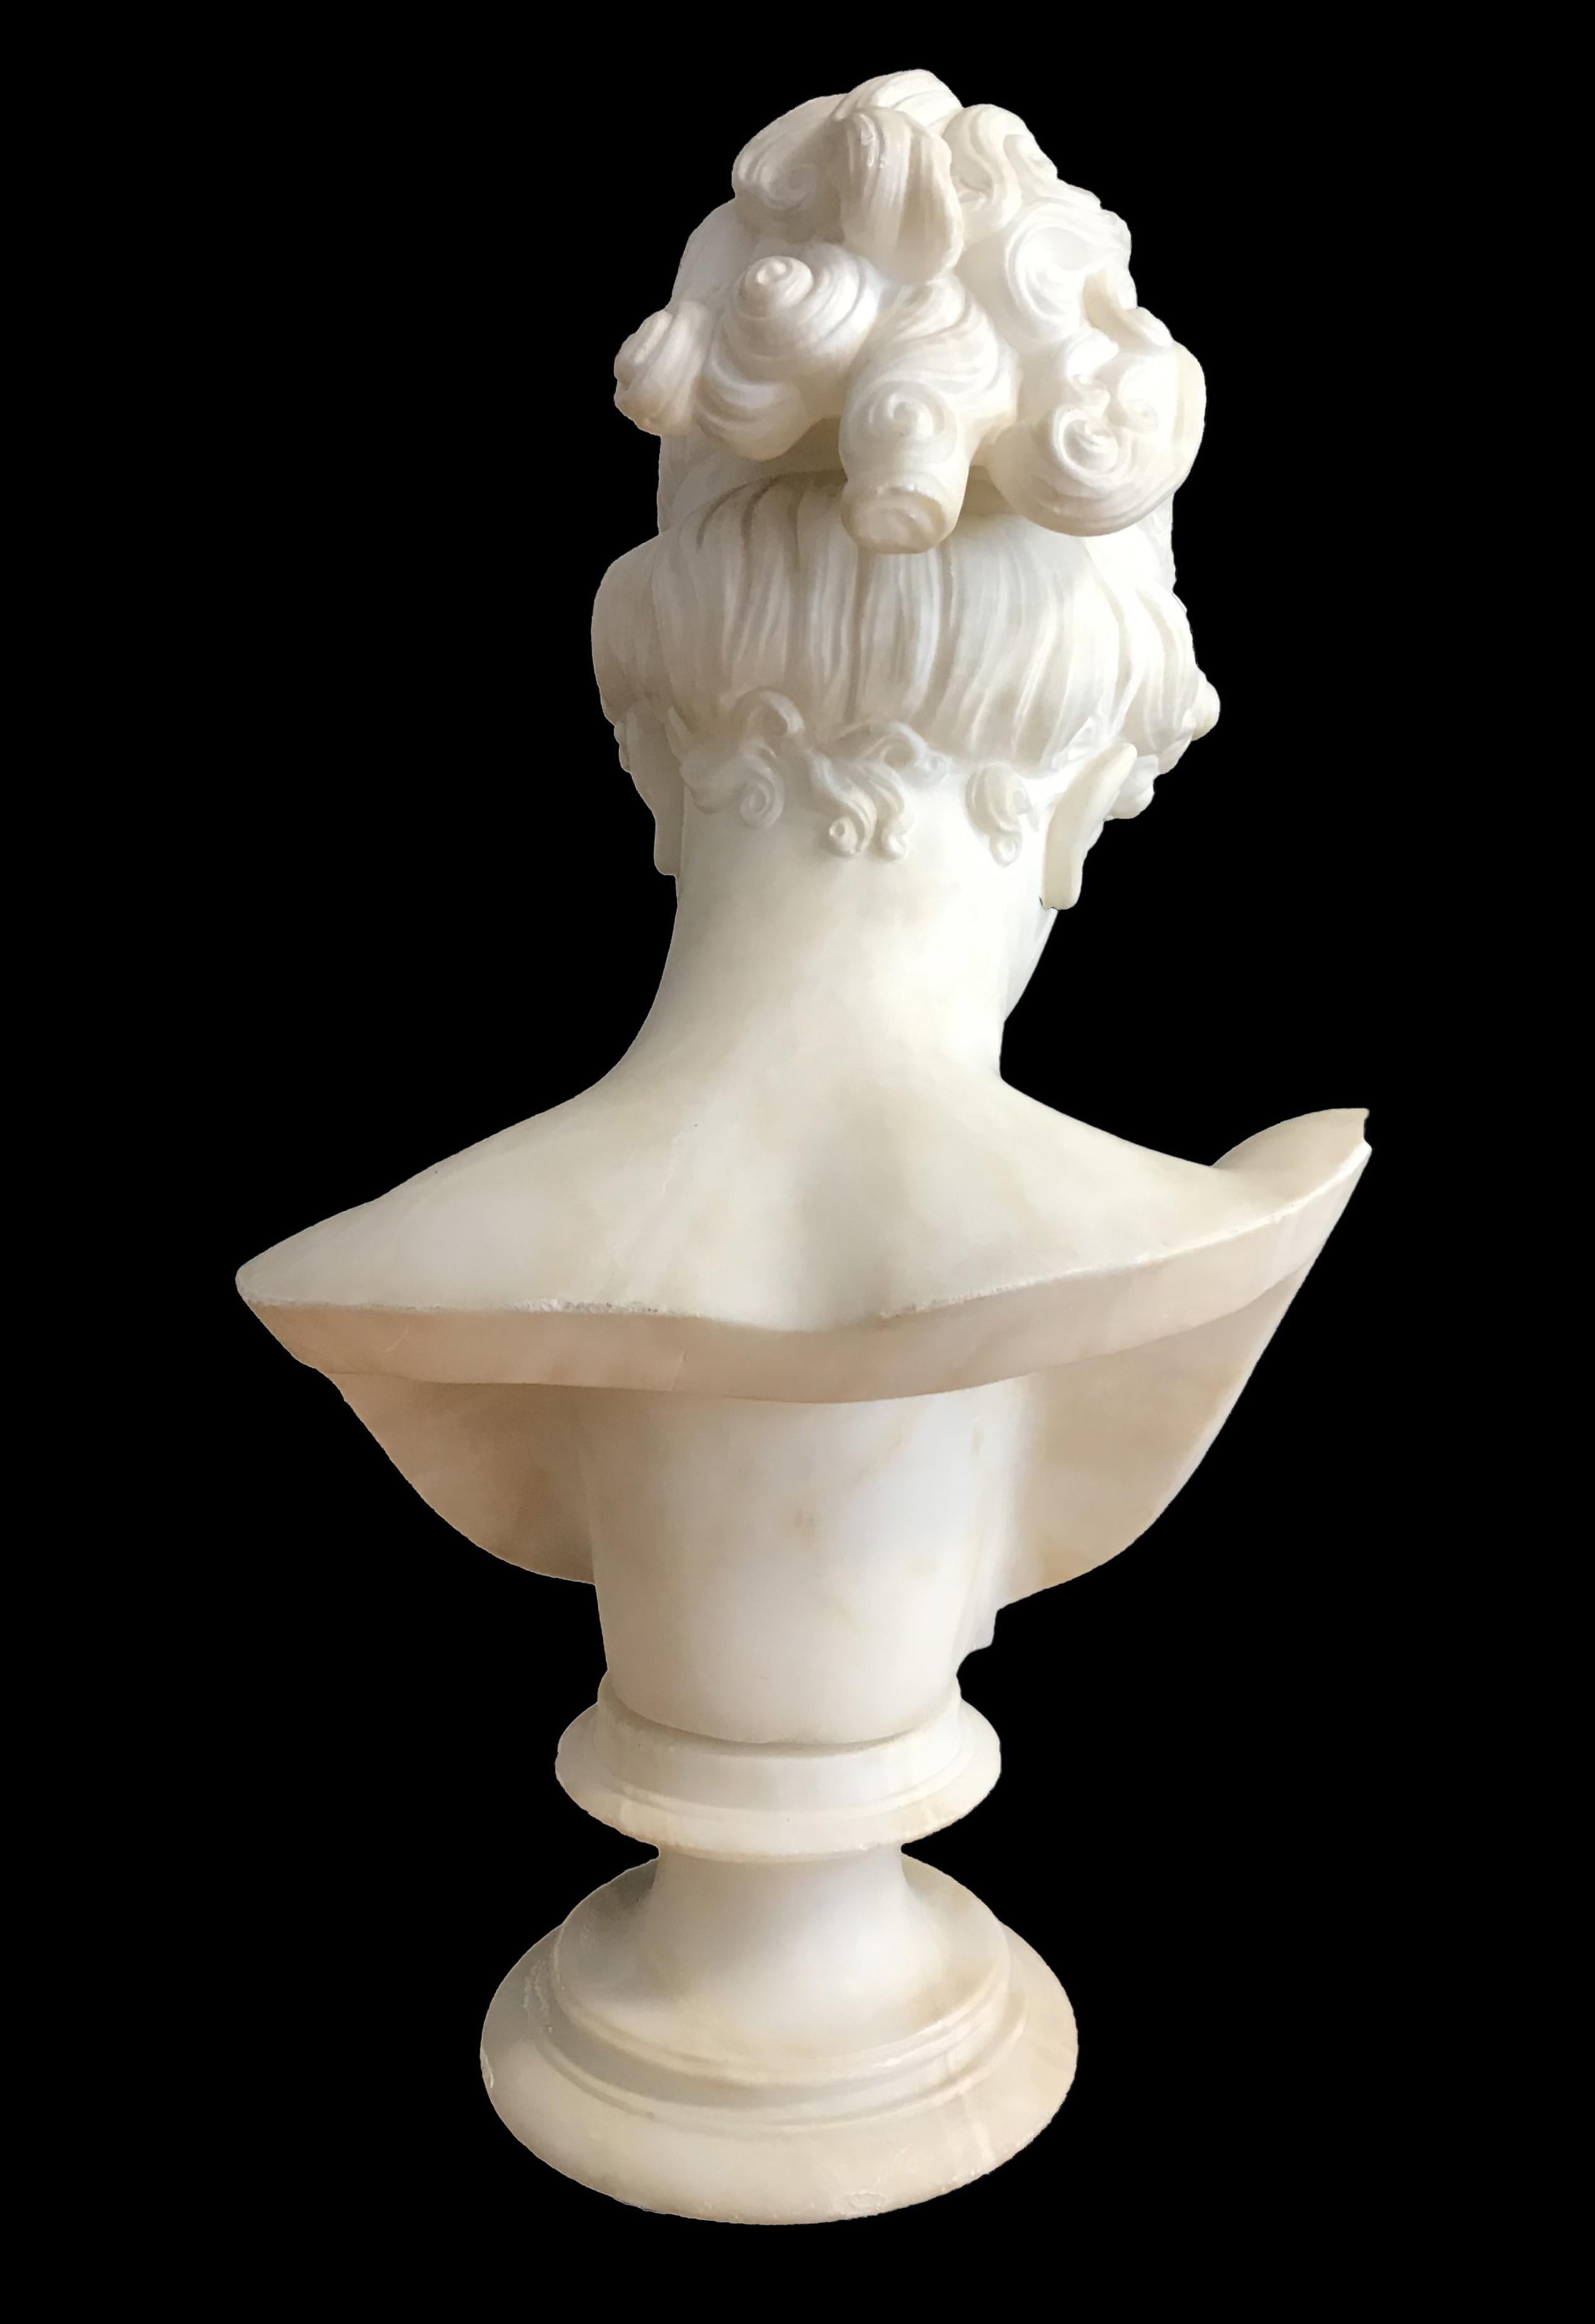 Beautiful and elegant Bust of Young Woman realized in Carrara Marble by a follower of Antonio Canova, Italy Early 19th Century.
It represents a young woman slightly inclined wearing a diadem and with hair combed in Neo-classic style, cut on